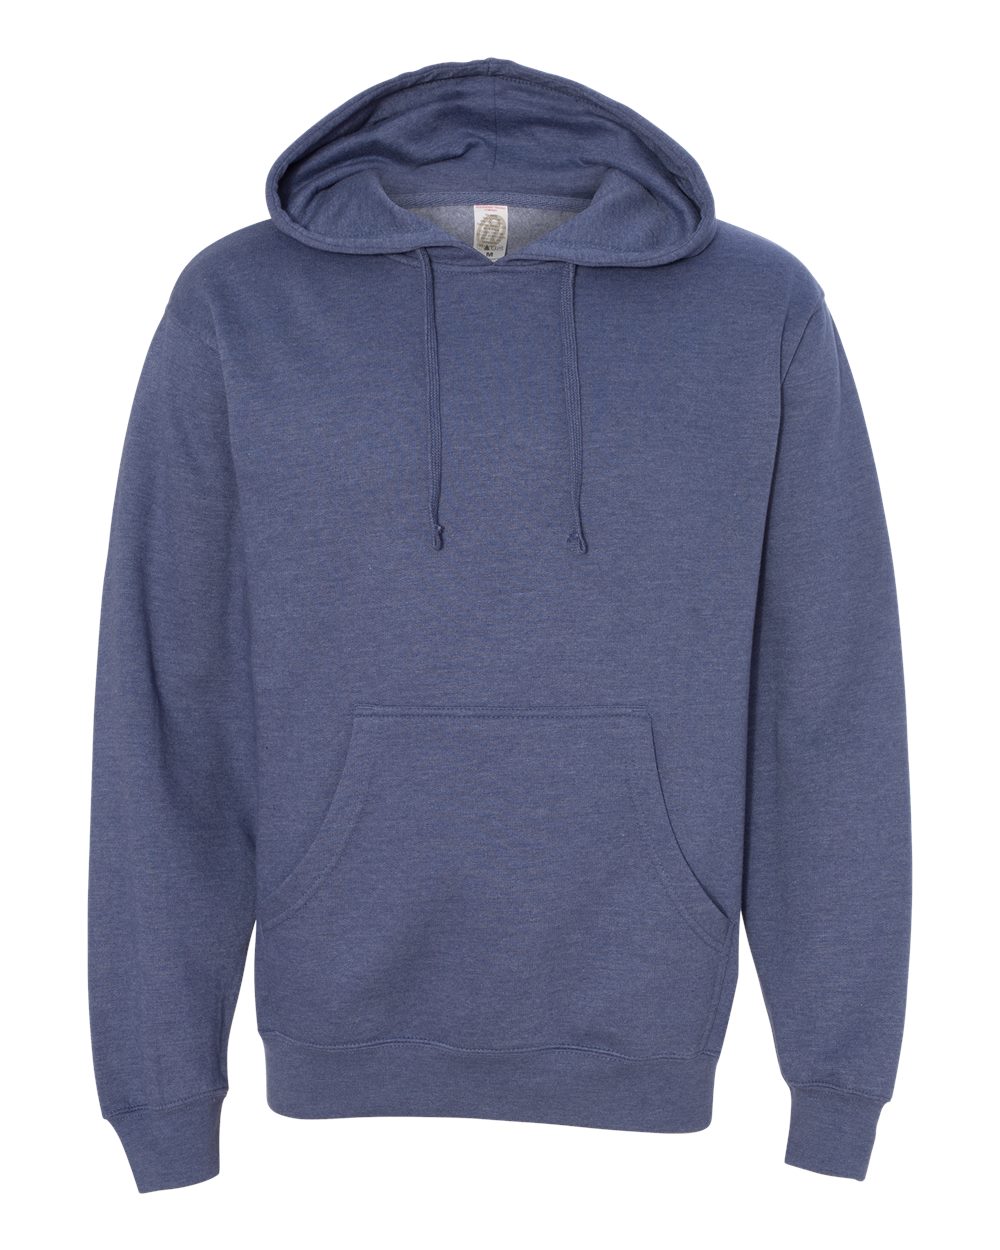 Independent Trading Co. SS4500 Midweight Hooded Pullover Sweatshirt | eBay